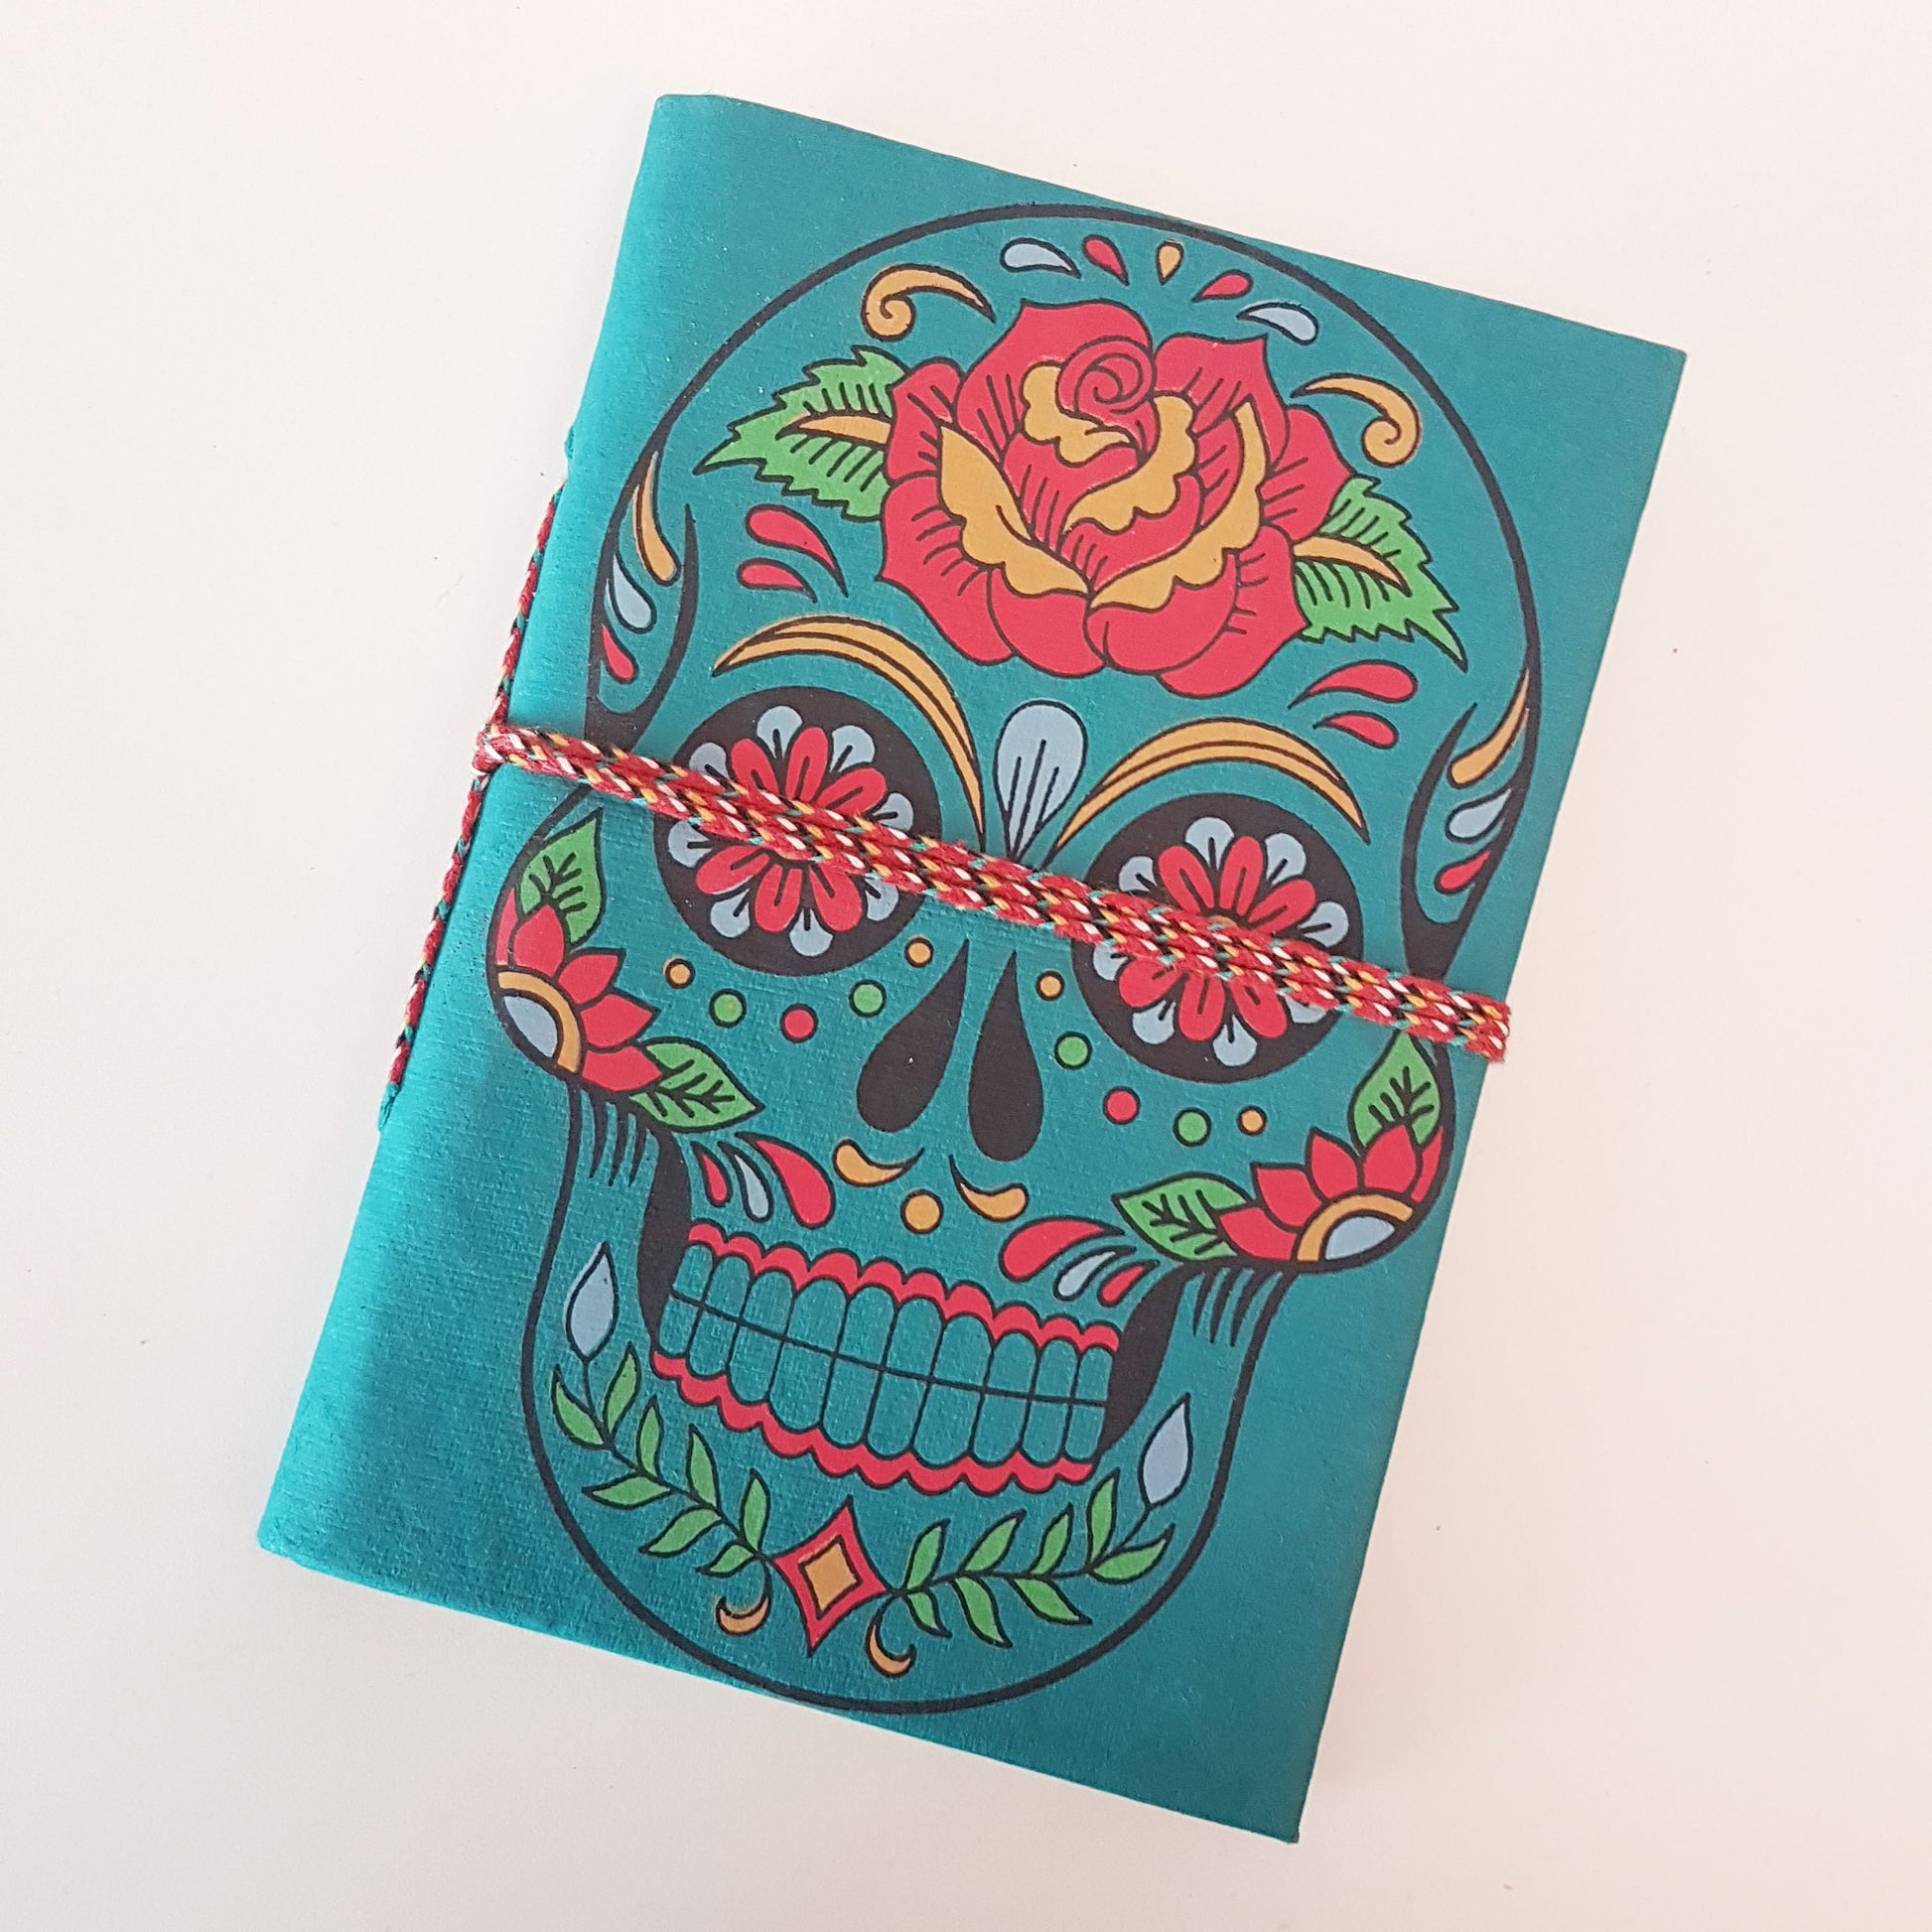 Teal skull sketchbook jotter 5 by 7 inches with blank artisan paper pages. Colorful gothic day of the dead sugarskull design diary in teal. - Vintage India Ca